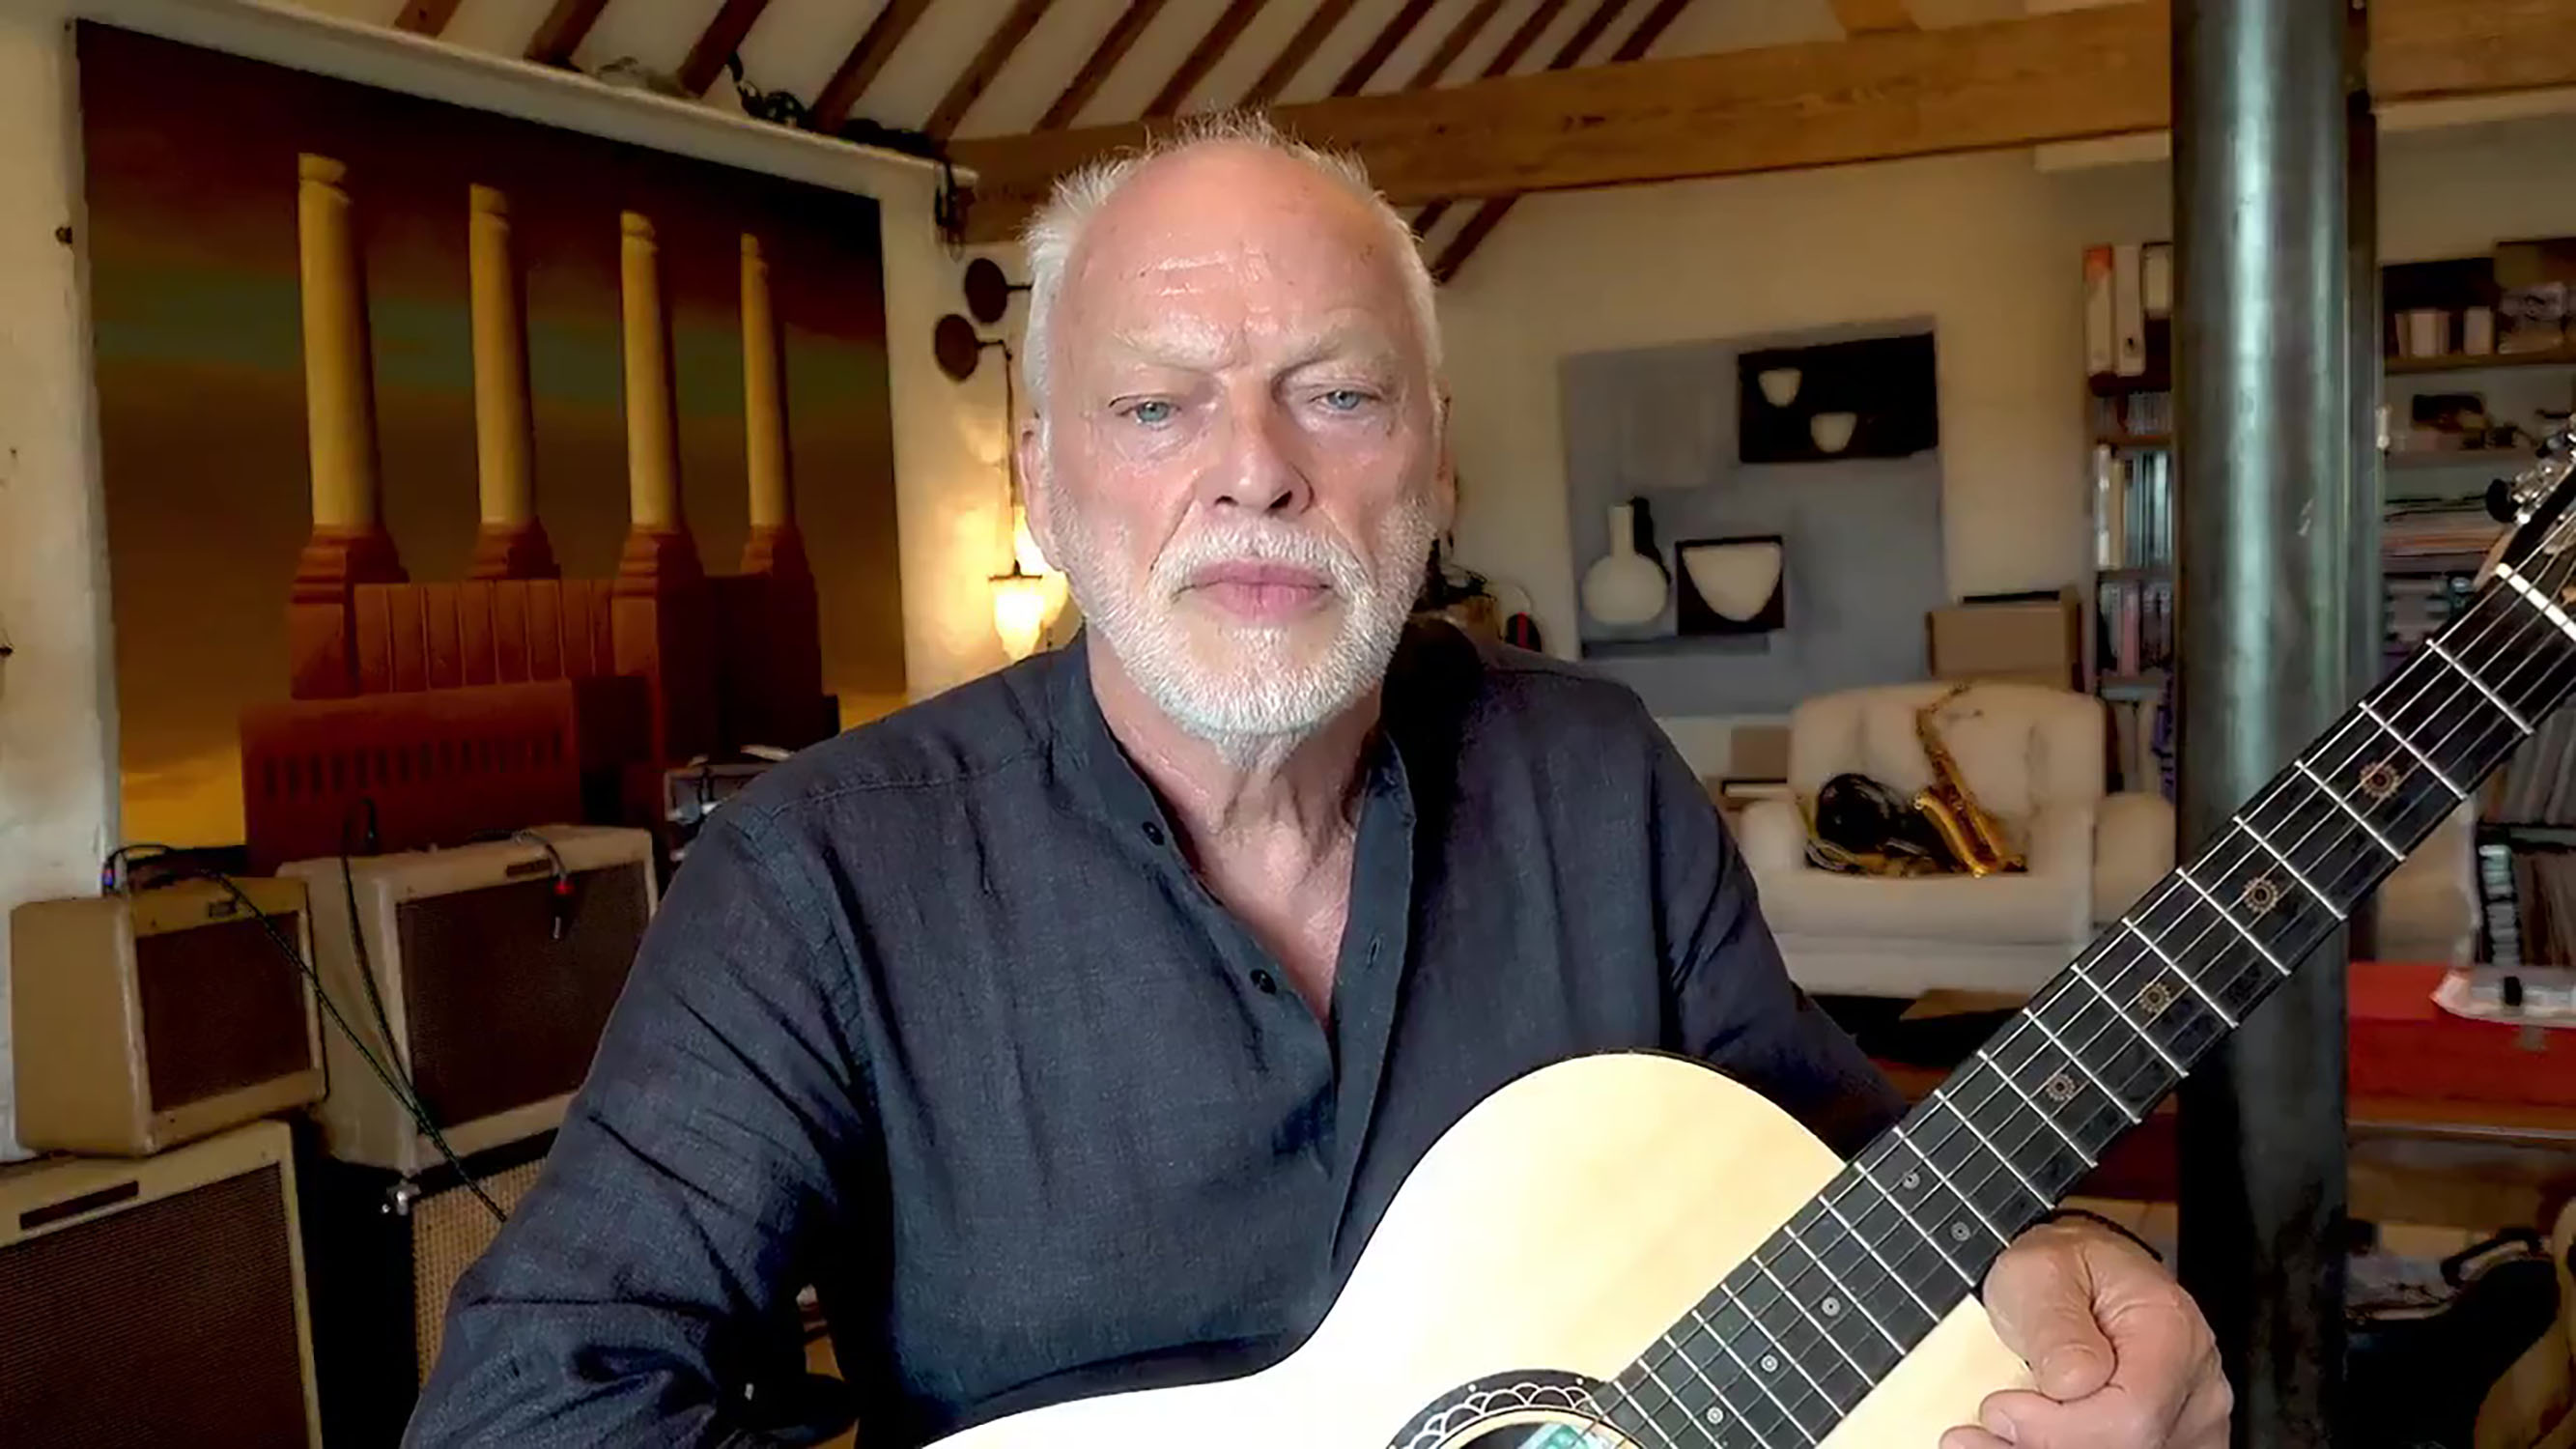 David Gilmour is releasing a new album